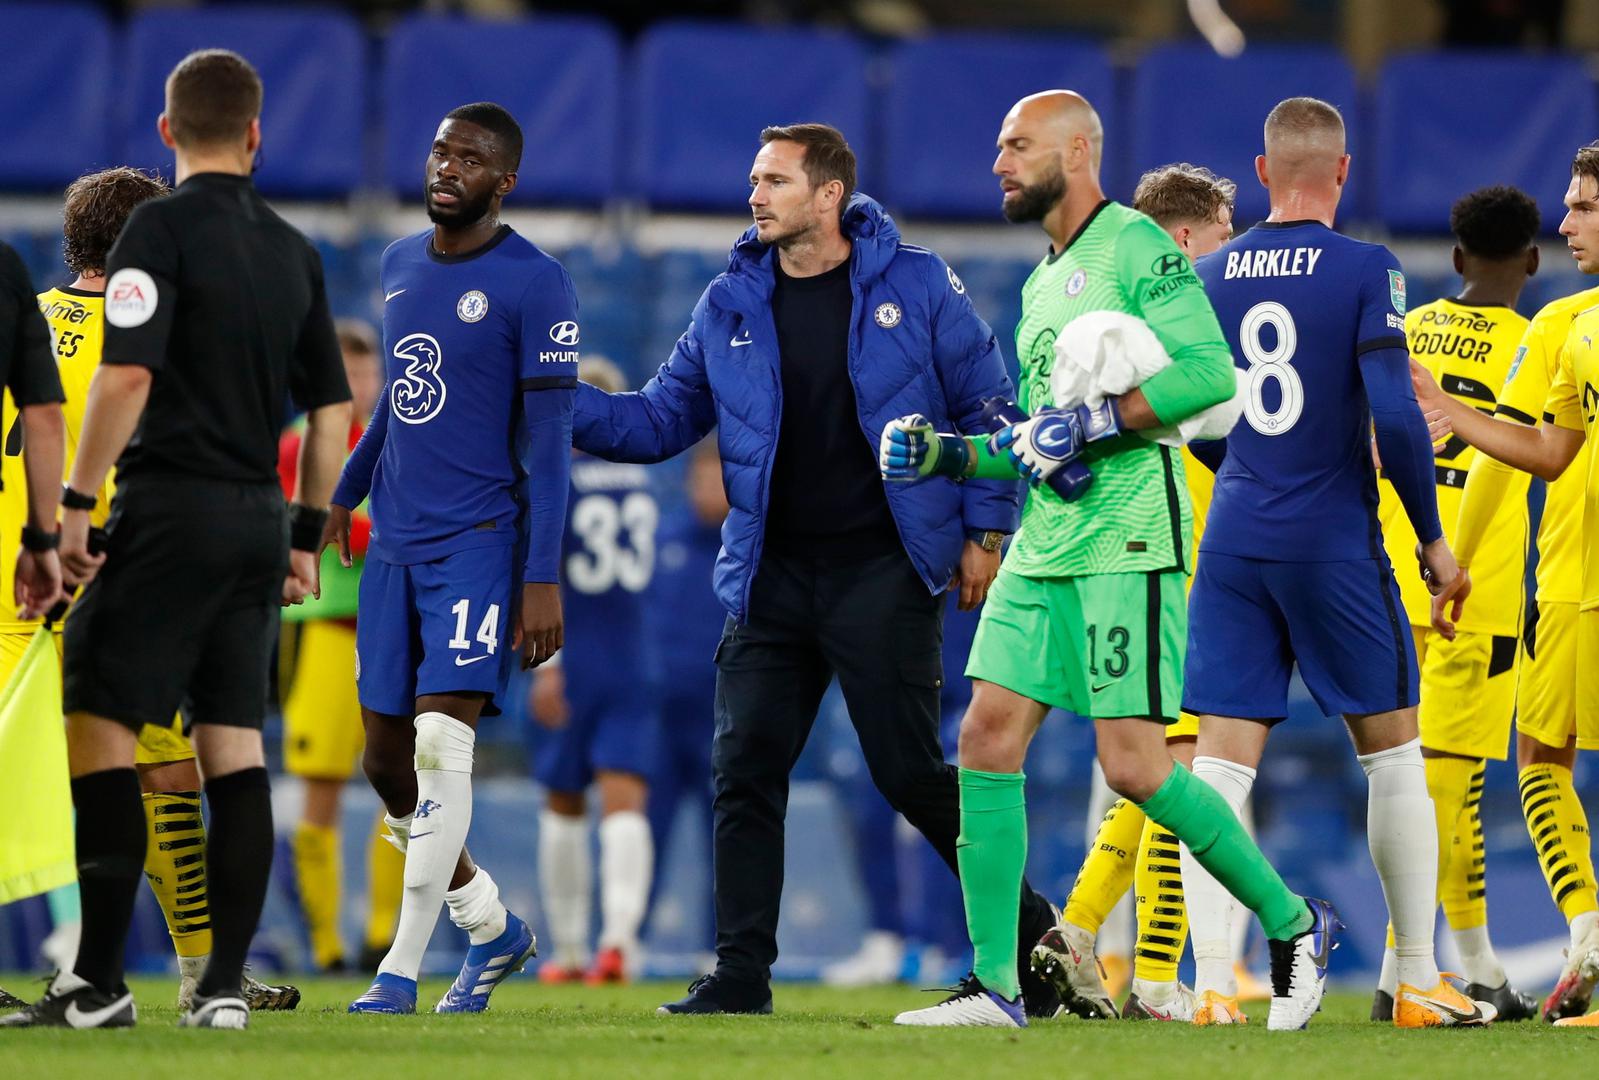 Carabao Cup Third Round - Chelsea v Barnsley Soccer Football - Carabao Cup Third Round - Chelsea v Barnsley - Stamford Bridge, London, Britain - September 23, 2020 Chelsea manager Frank Lampard  with  Fikayo Tomori after the match Pool via REUTERS/Alastair Grant EDITORIAL USE ONLY. No use with unauthorized audio, video, data, fixture lists, club/league logos or 'live' services. Online in-match use limited to 75 images, no video emulation. No use in betting, games or single club/league/player publications.  Please contact your account representative for further details. ALASTAIR GRANT